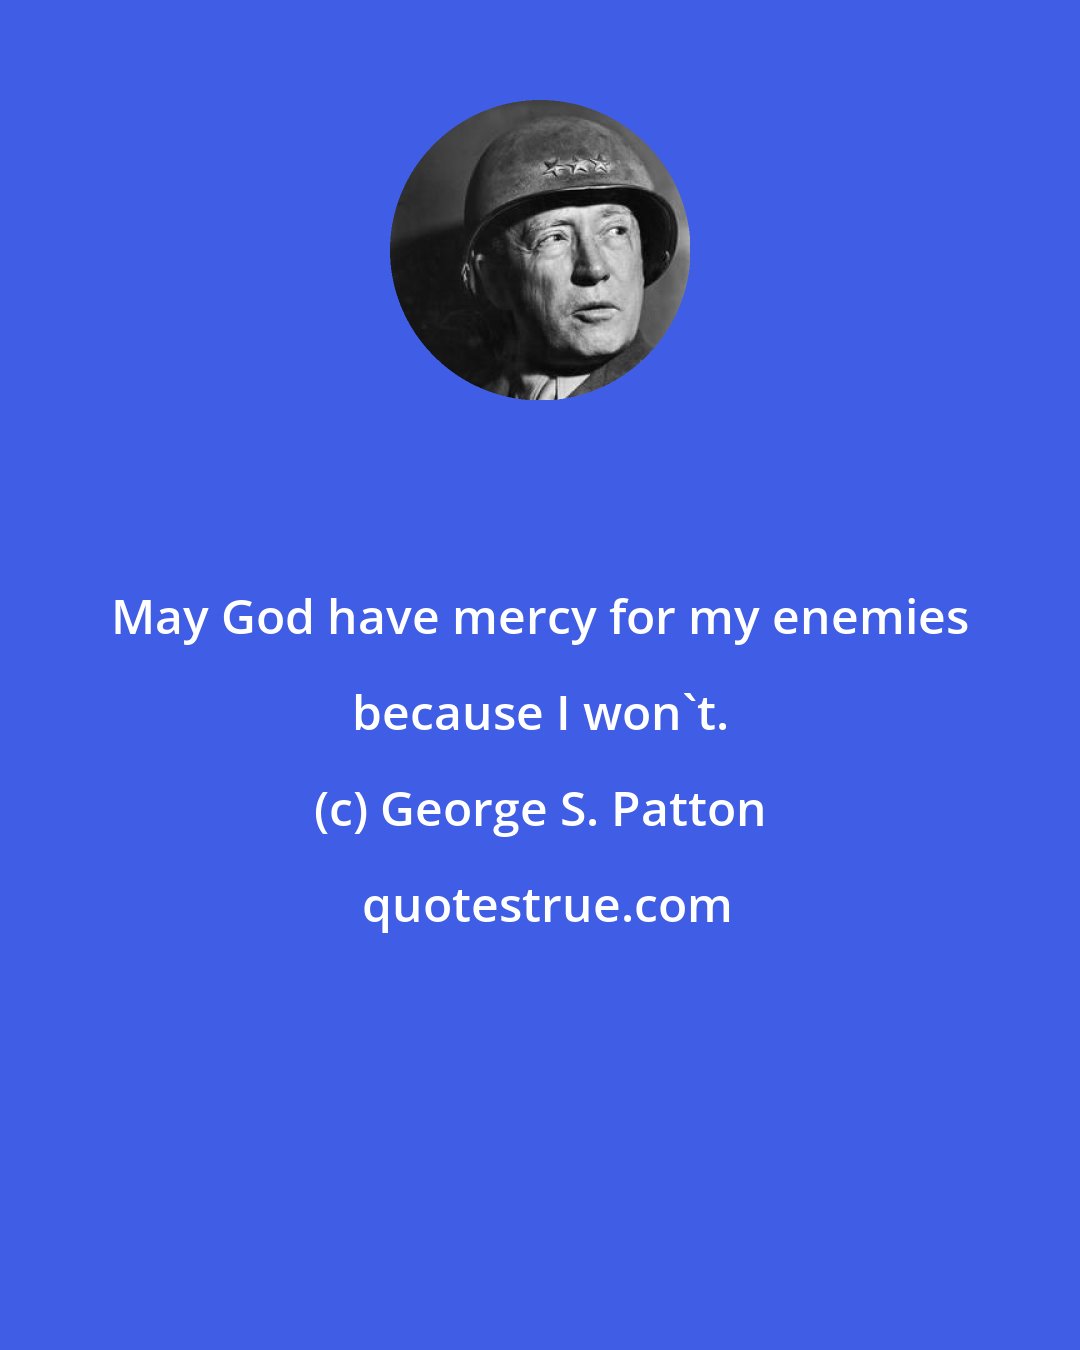 George S. Patton: May God have mercy for my enemies because I won't.